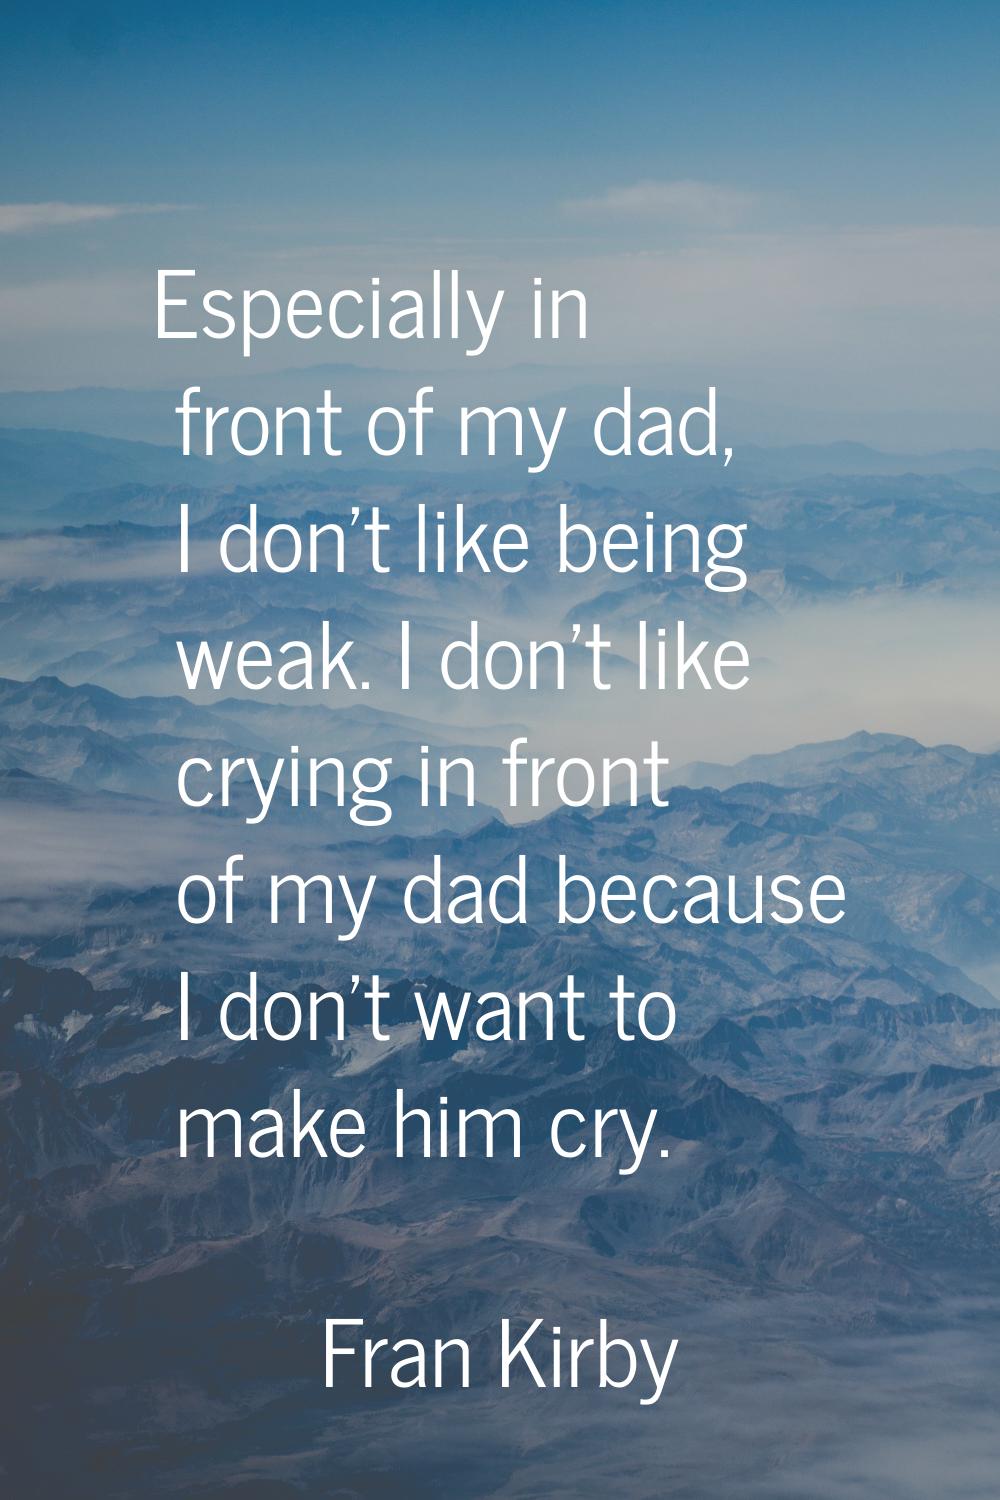 Especially in front of my dad, I don't like being weak. I don't like crying in front of my dad beca